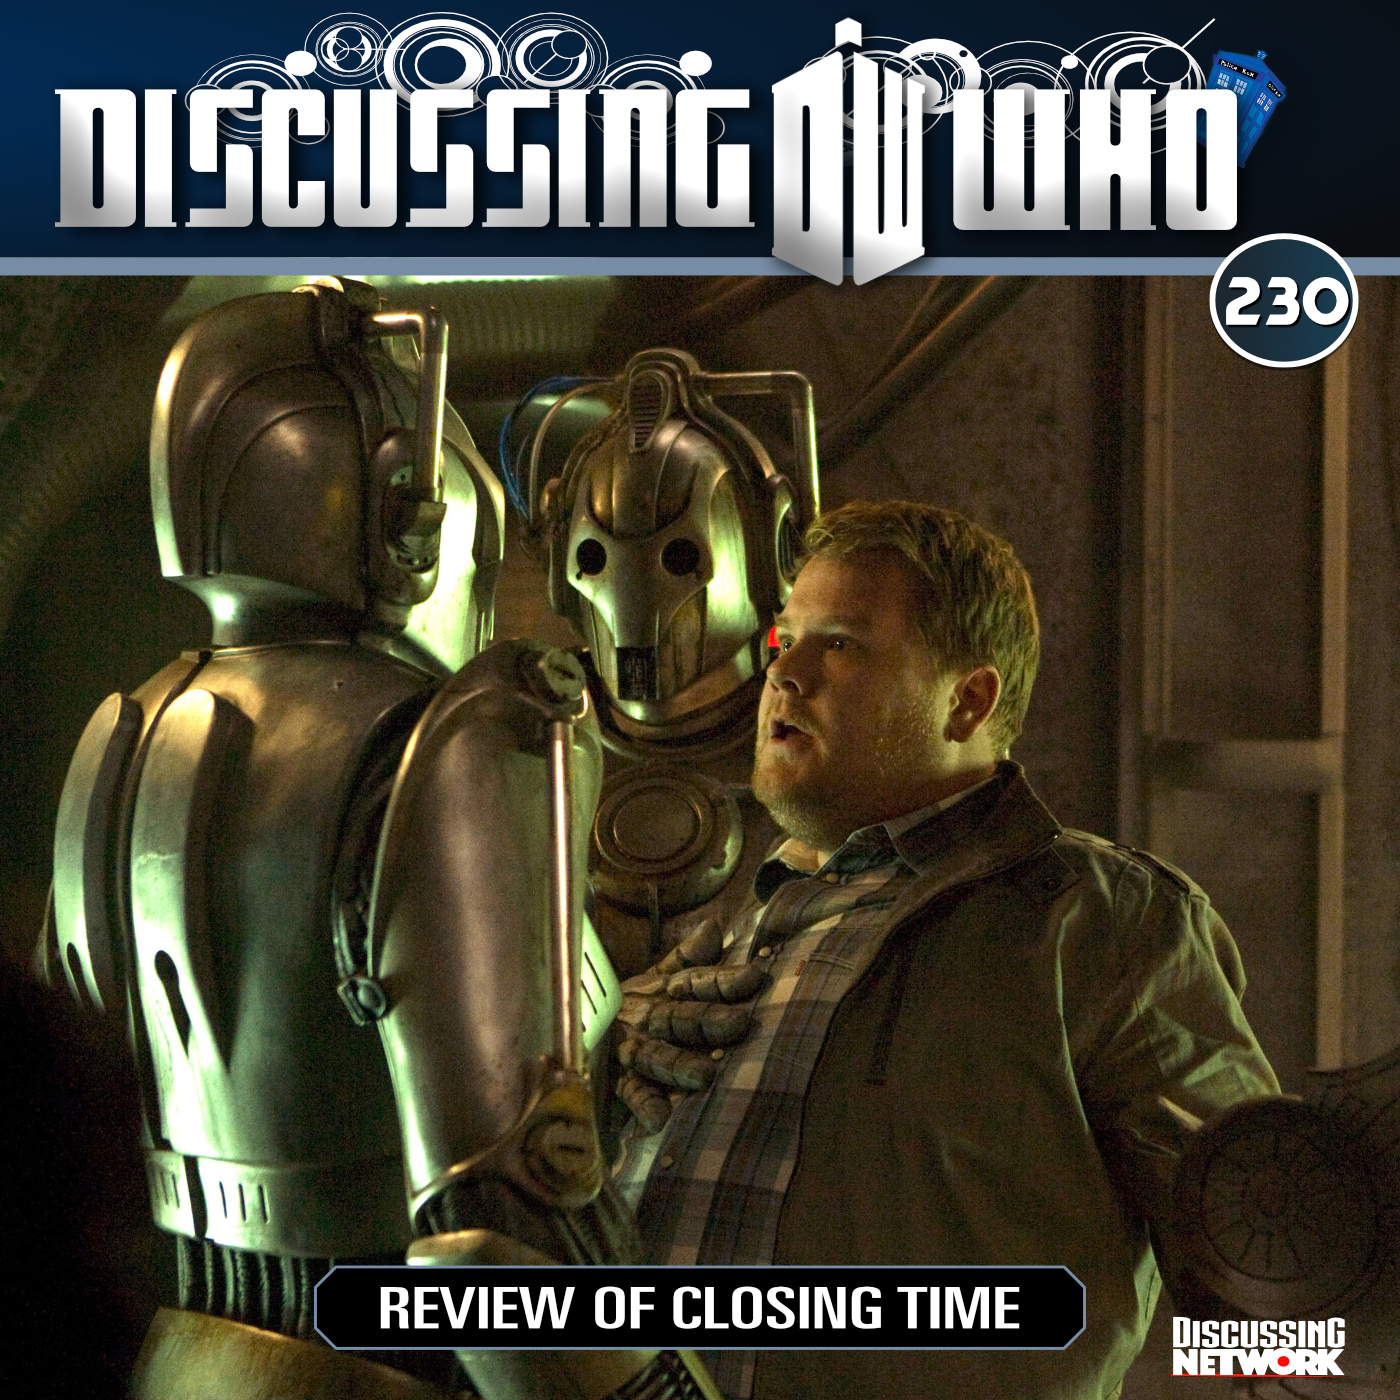 Review of Doctor Who Series 6 Episode 12